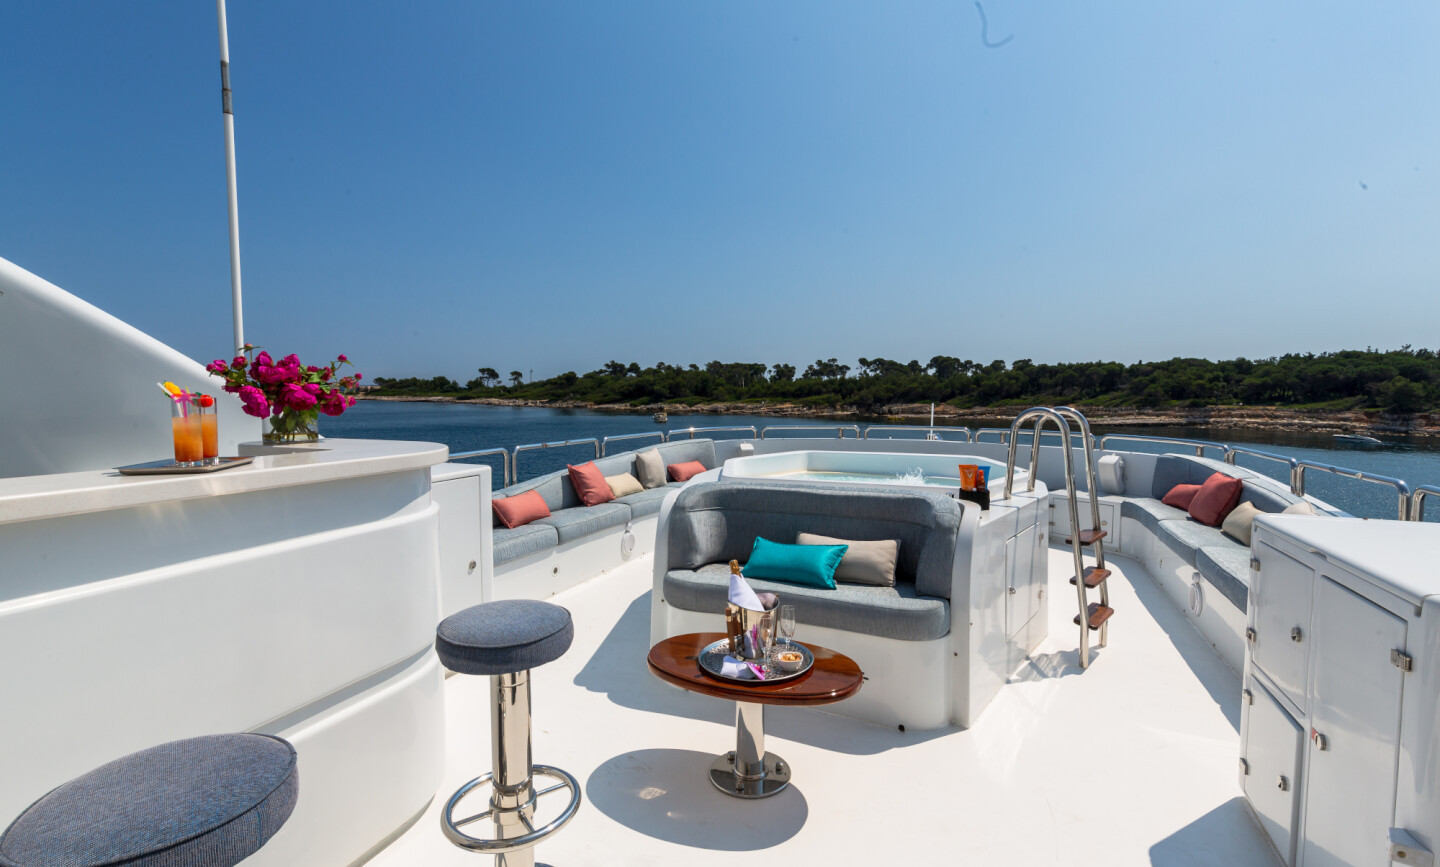 DXB yacht for Charter